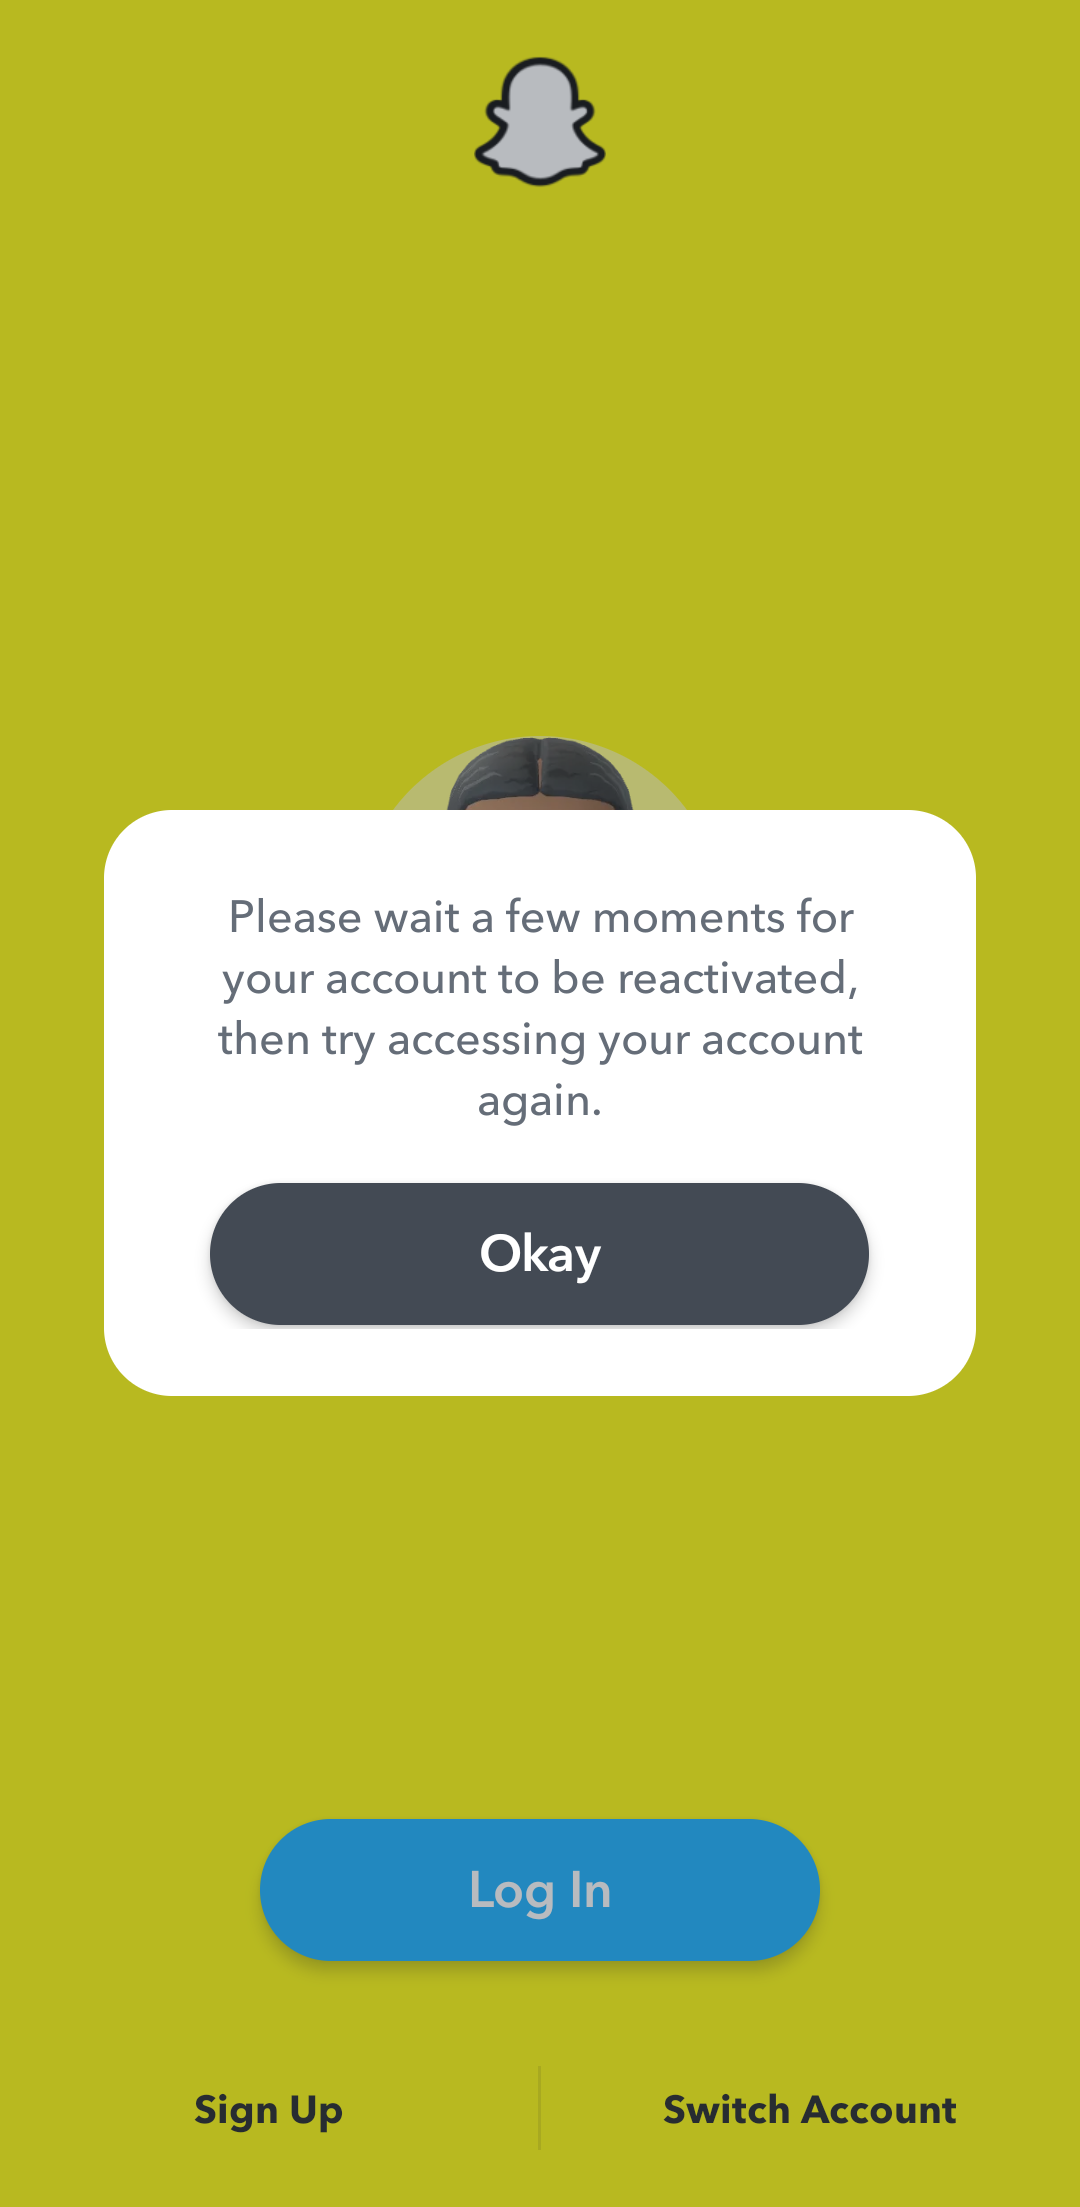 Reactivation confirmation message on Snapchat mobile app